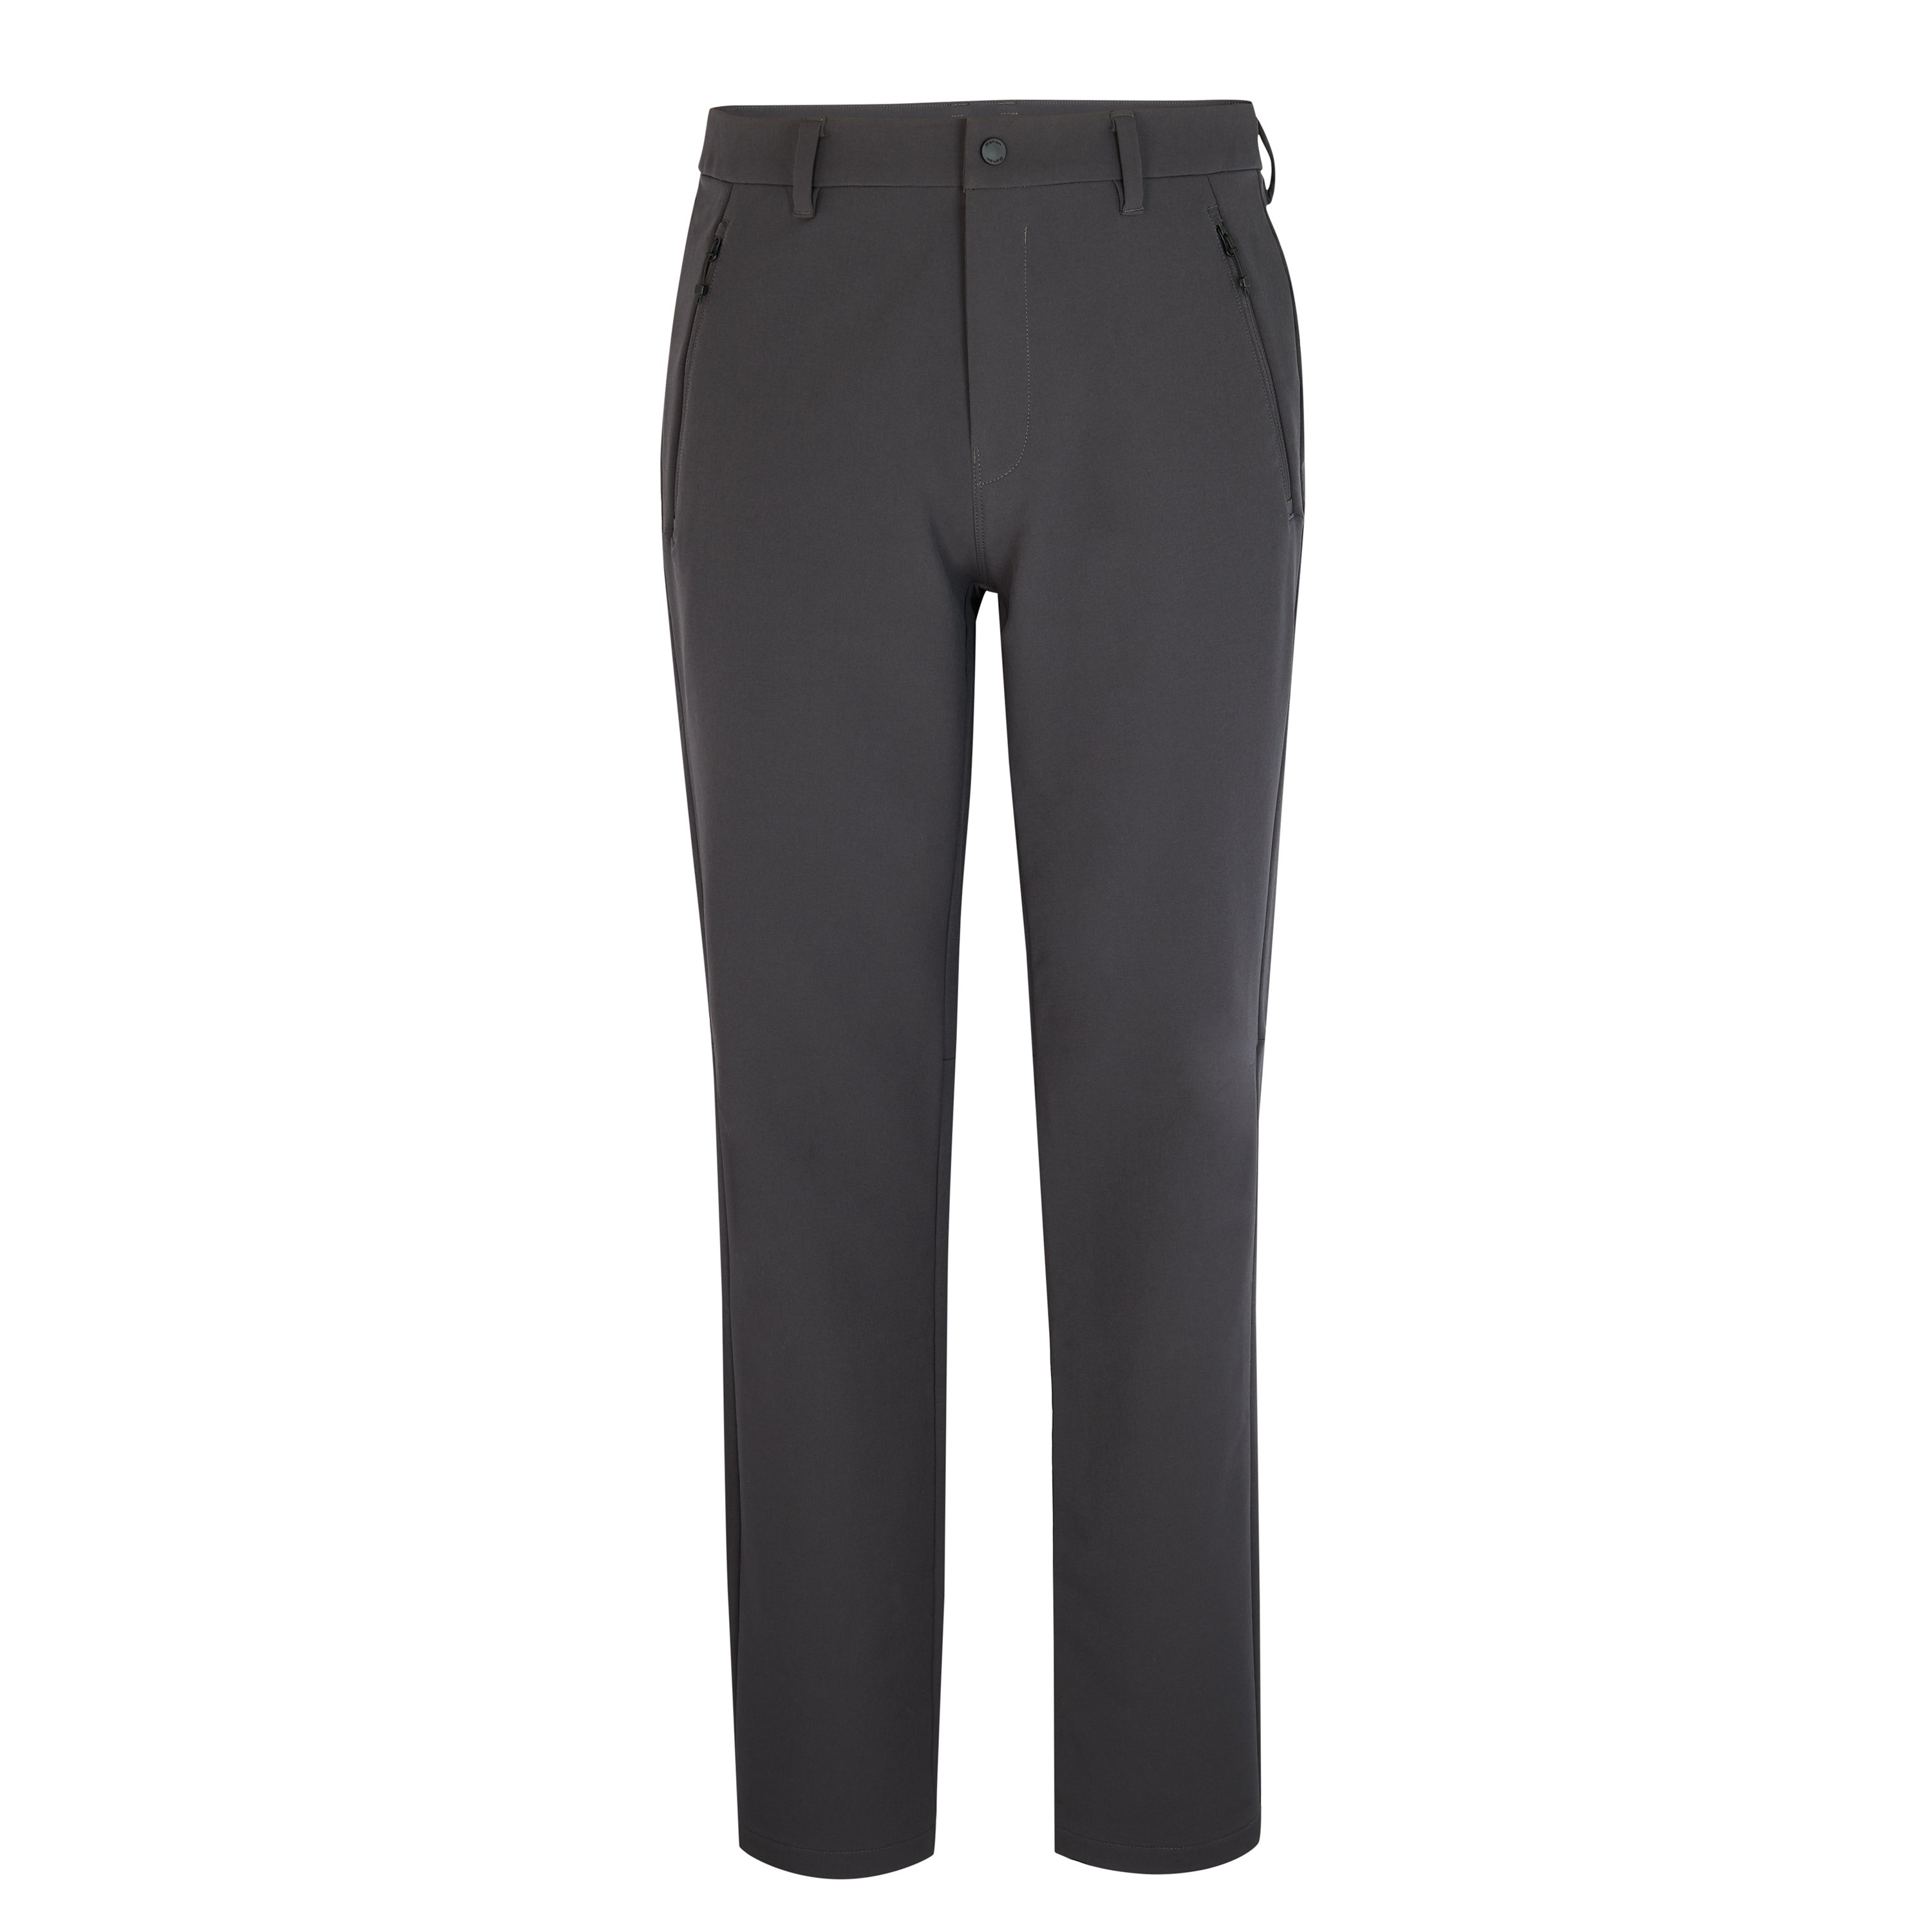 Men’s Striders Hiking Trousers